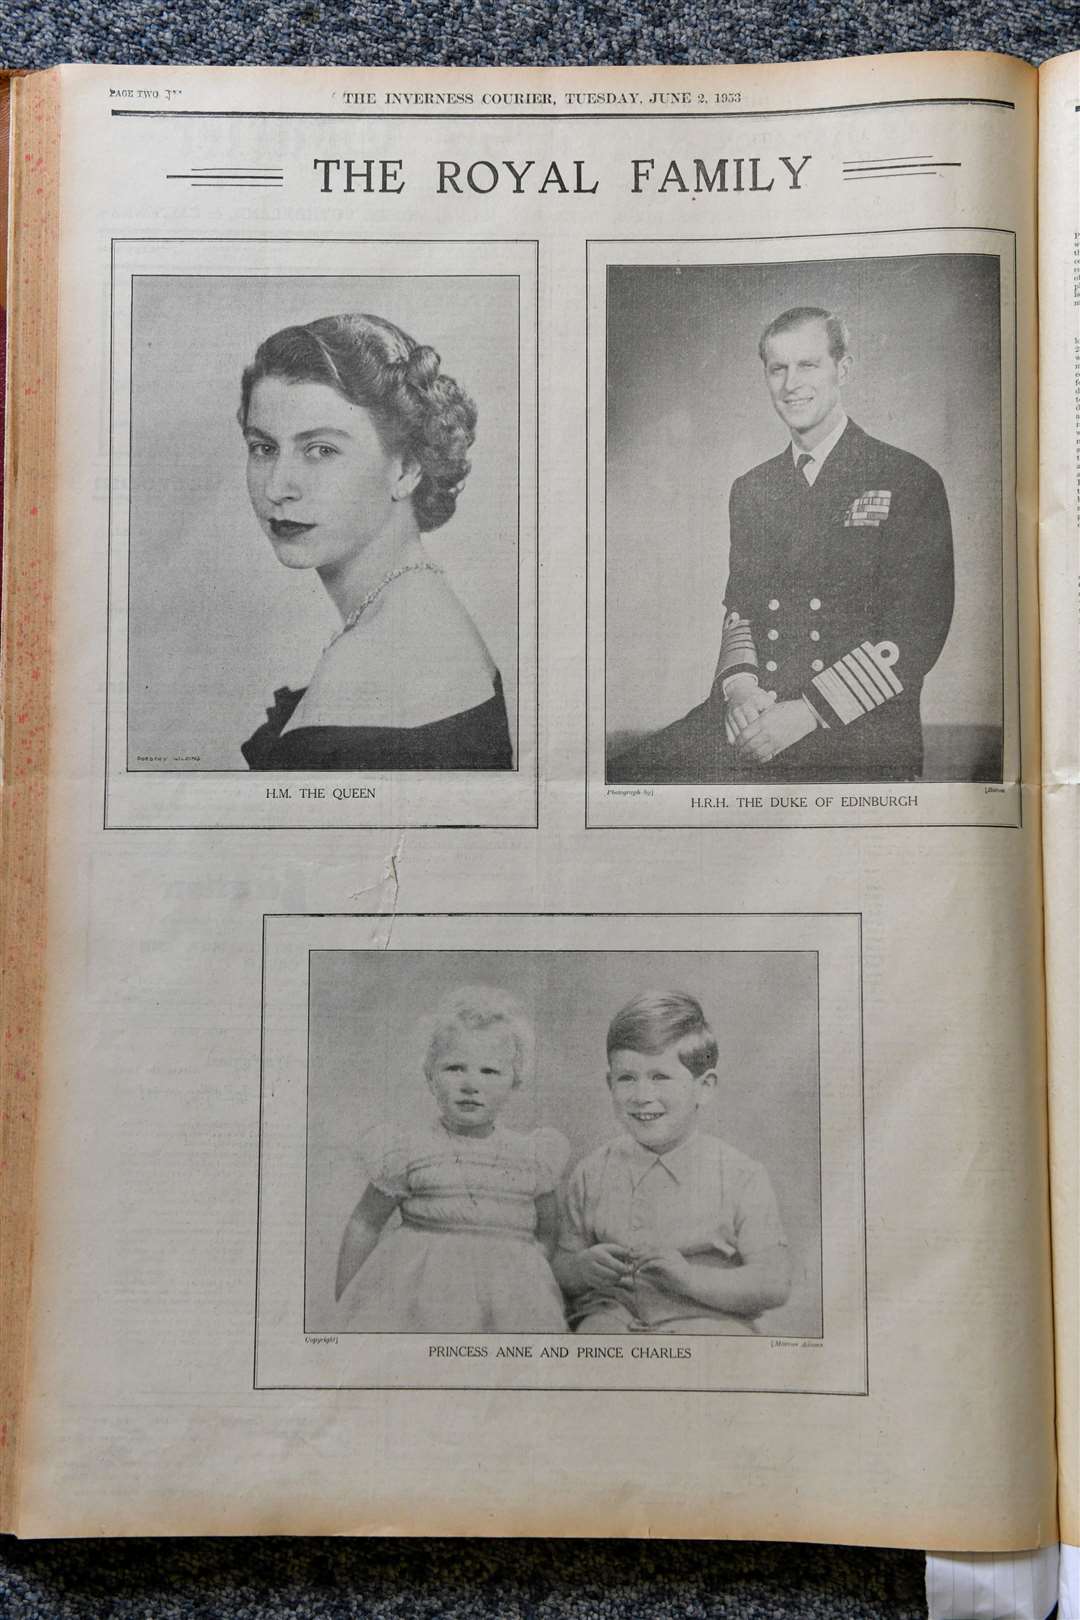 The Courier carried portraits of the Queen, her husband Philip and Prince Charles and Princess Anne in the run up to the Coronation in 1953.